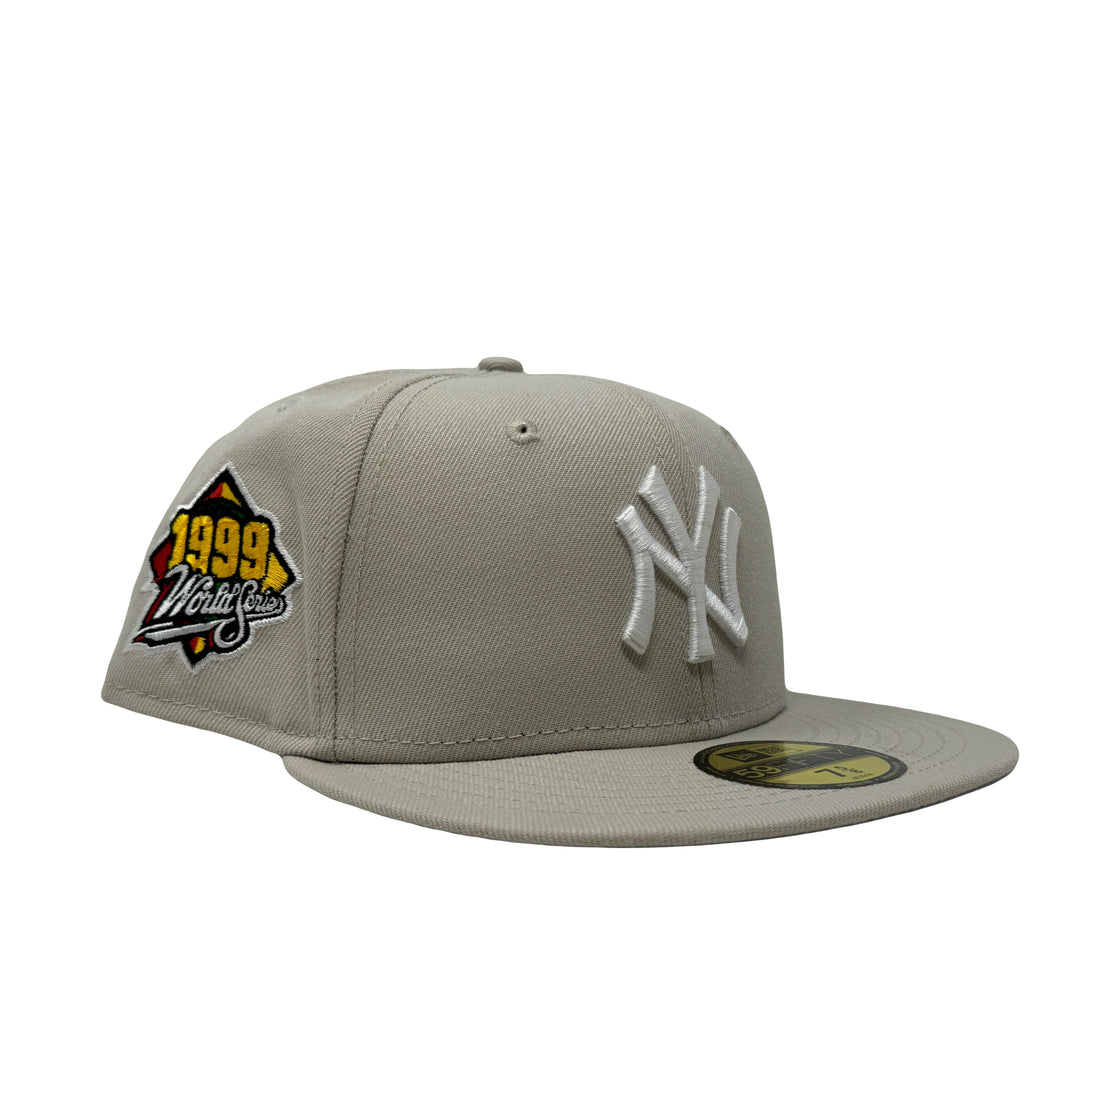 New York Yankees 1999 World Series Stone Color 5950 New Era Fitted Hat